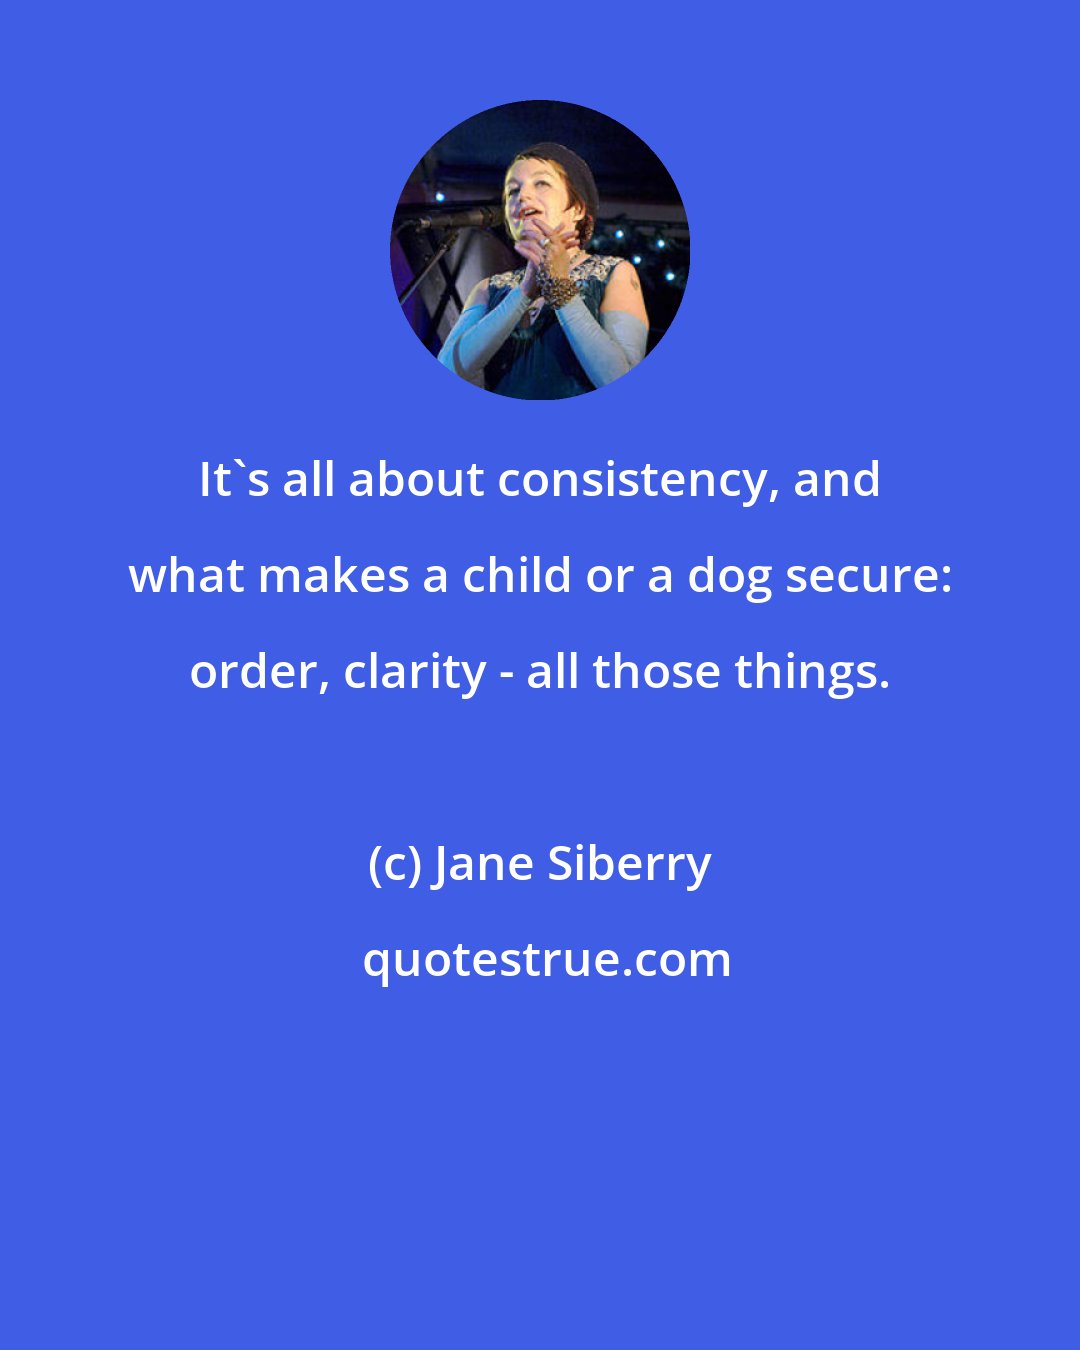 Jane Siberry: It's all about consistency, and what makes a child or a dog secure: order, clarity - all those things.